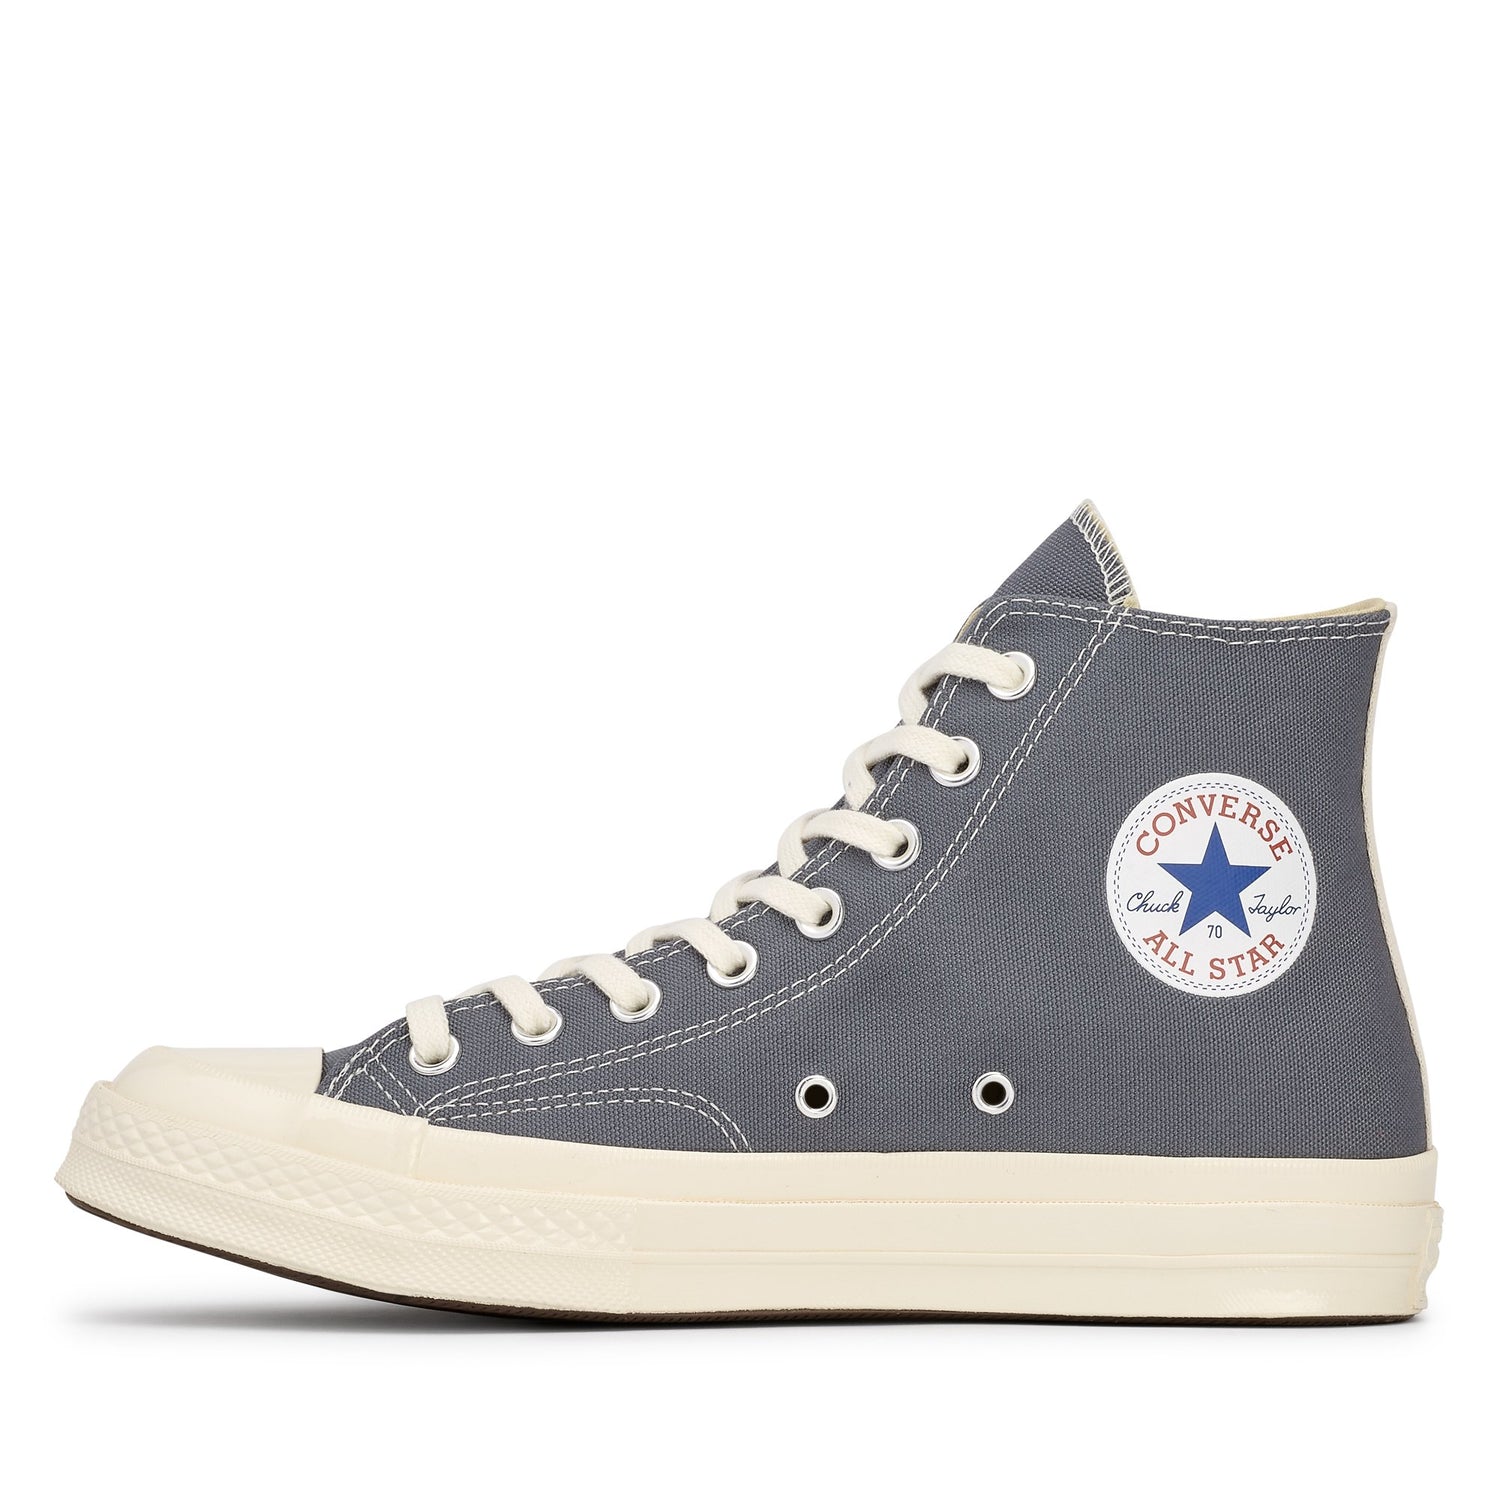 Play Converse: Black Heart Chuck Taylor All Star ’70 High Sneakers ...